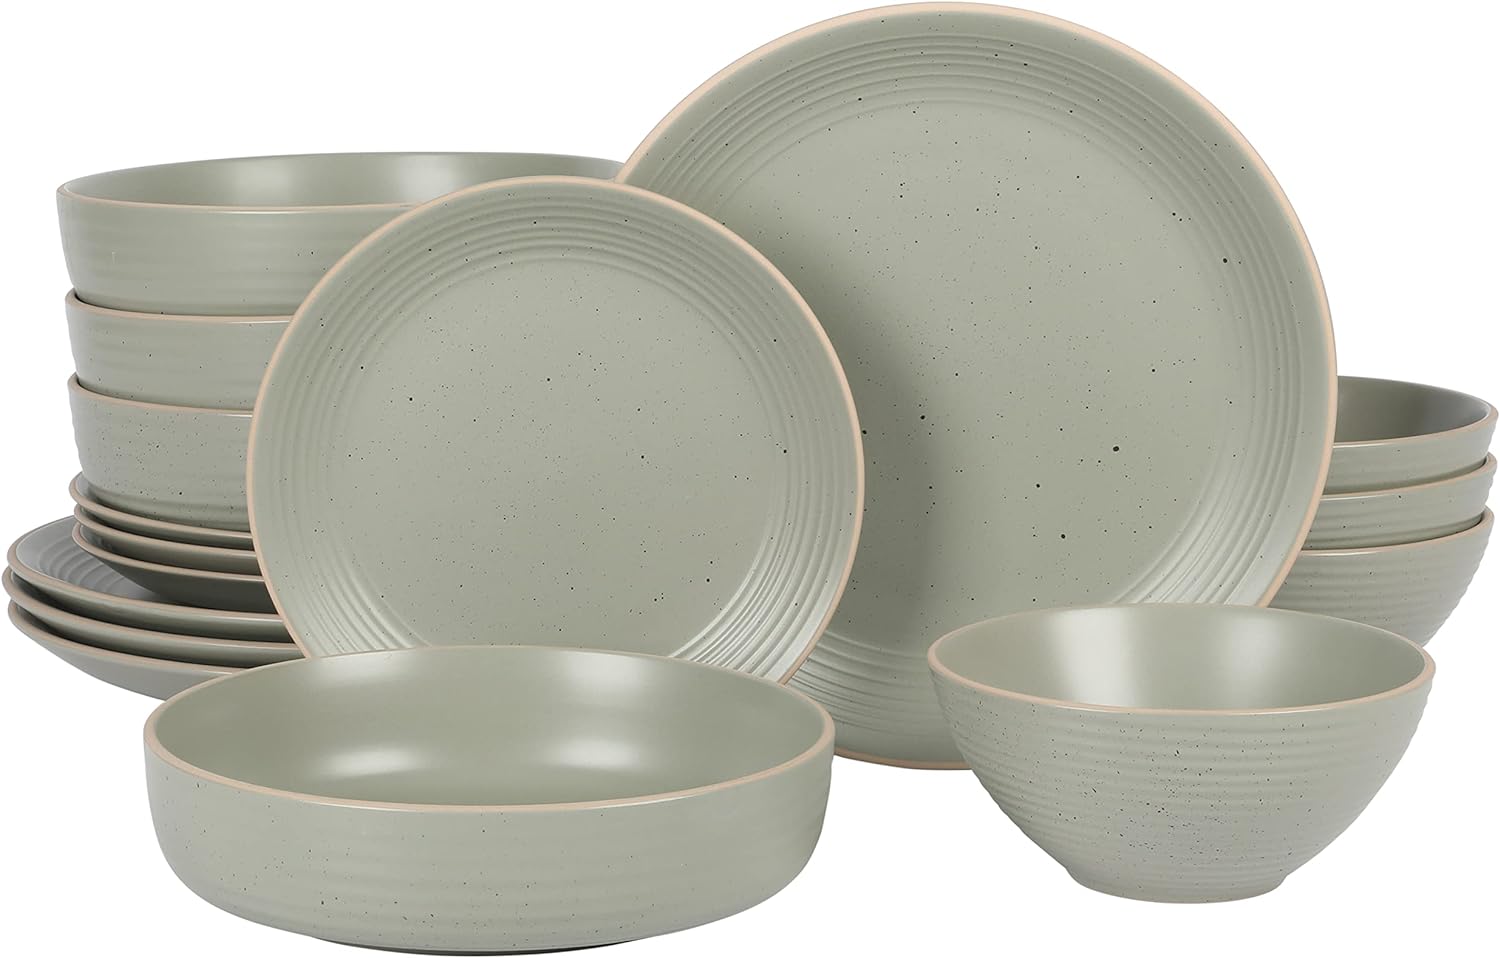 Gibson Home Dinah 16 Piece Double Bowl Stoneware Embossed Speckled Dinnerware Set - Matte Black, White, or Sage Green